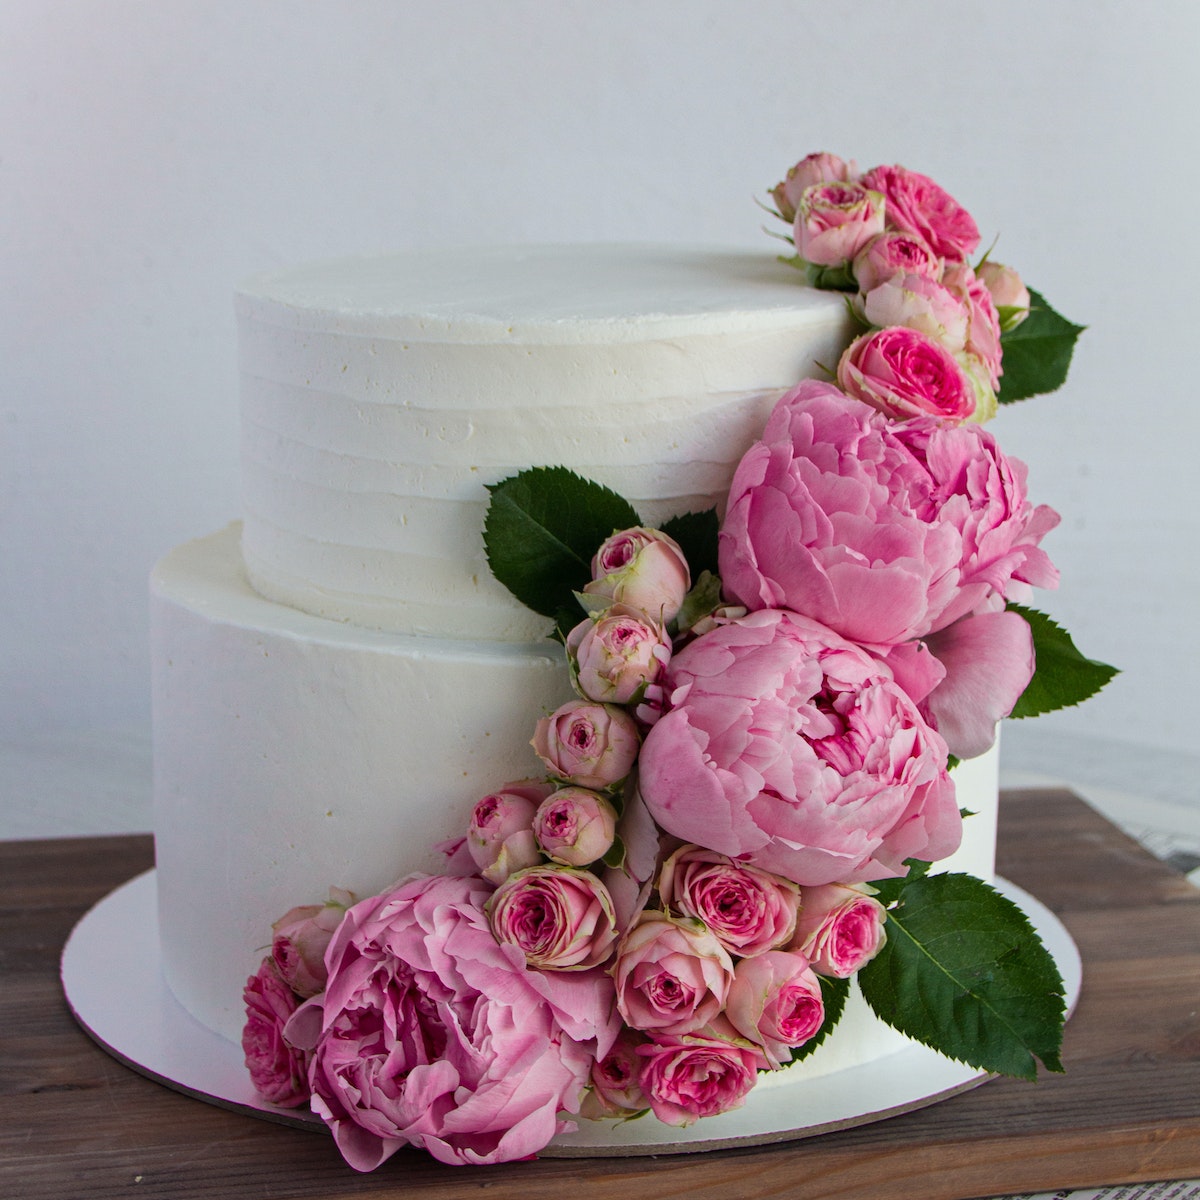 21 Feast Your Eyes on These Amazingly Decorated Cakes ...